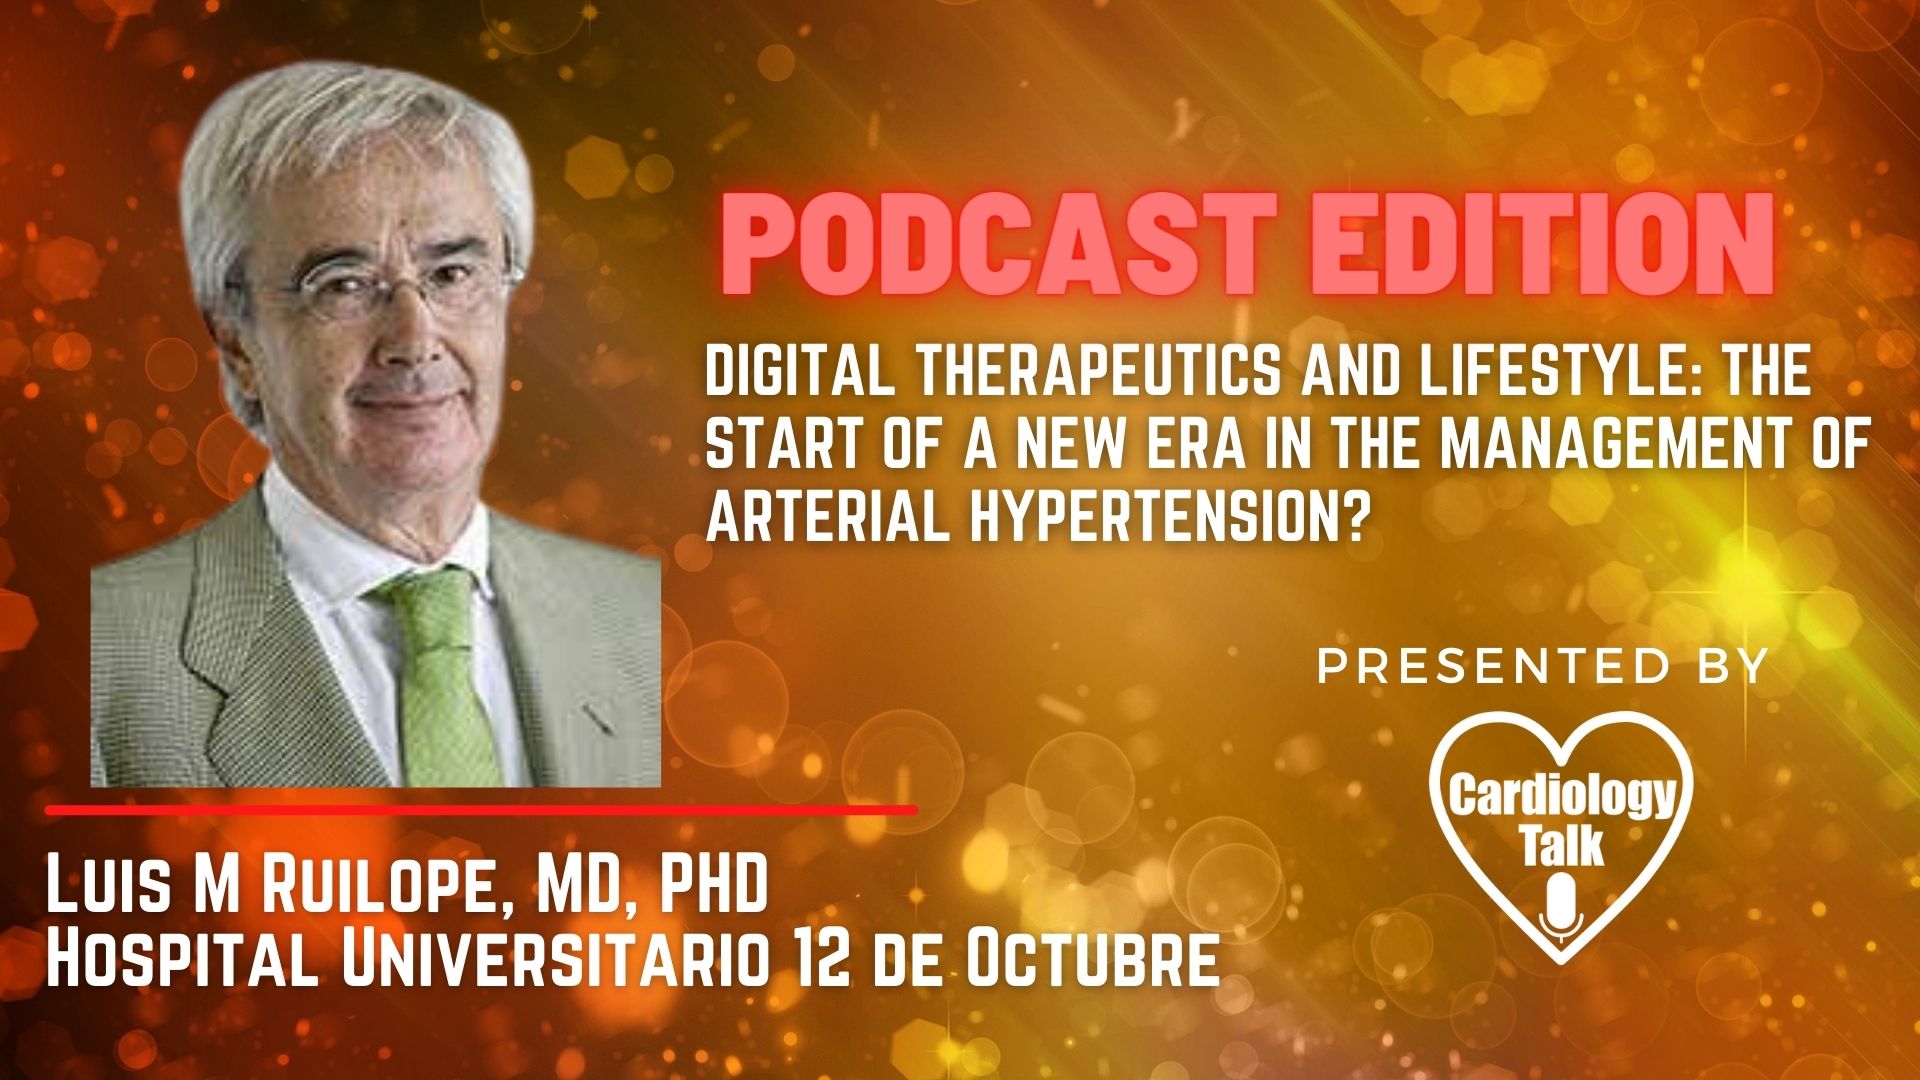 Podcast- Luis M. Ruilope, MD- Digital therapeutics and lifestyle: the start of a new era in the management of arterial hypertension? @LuisRuilope  #h12octubre #Hospital12deOctubre #Arteri...